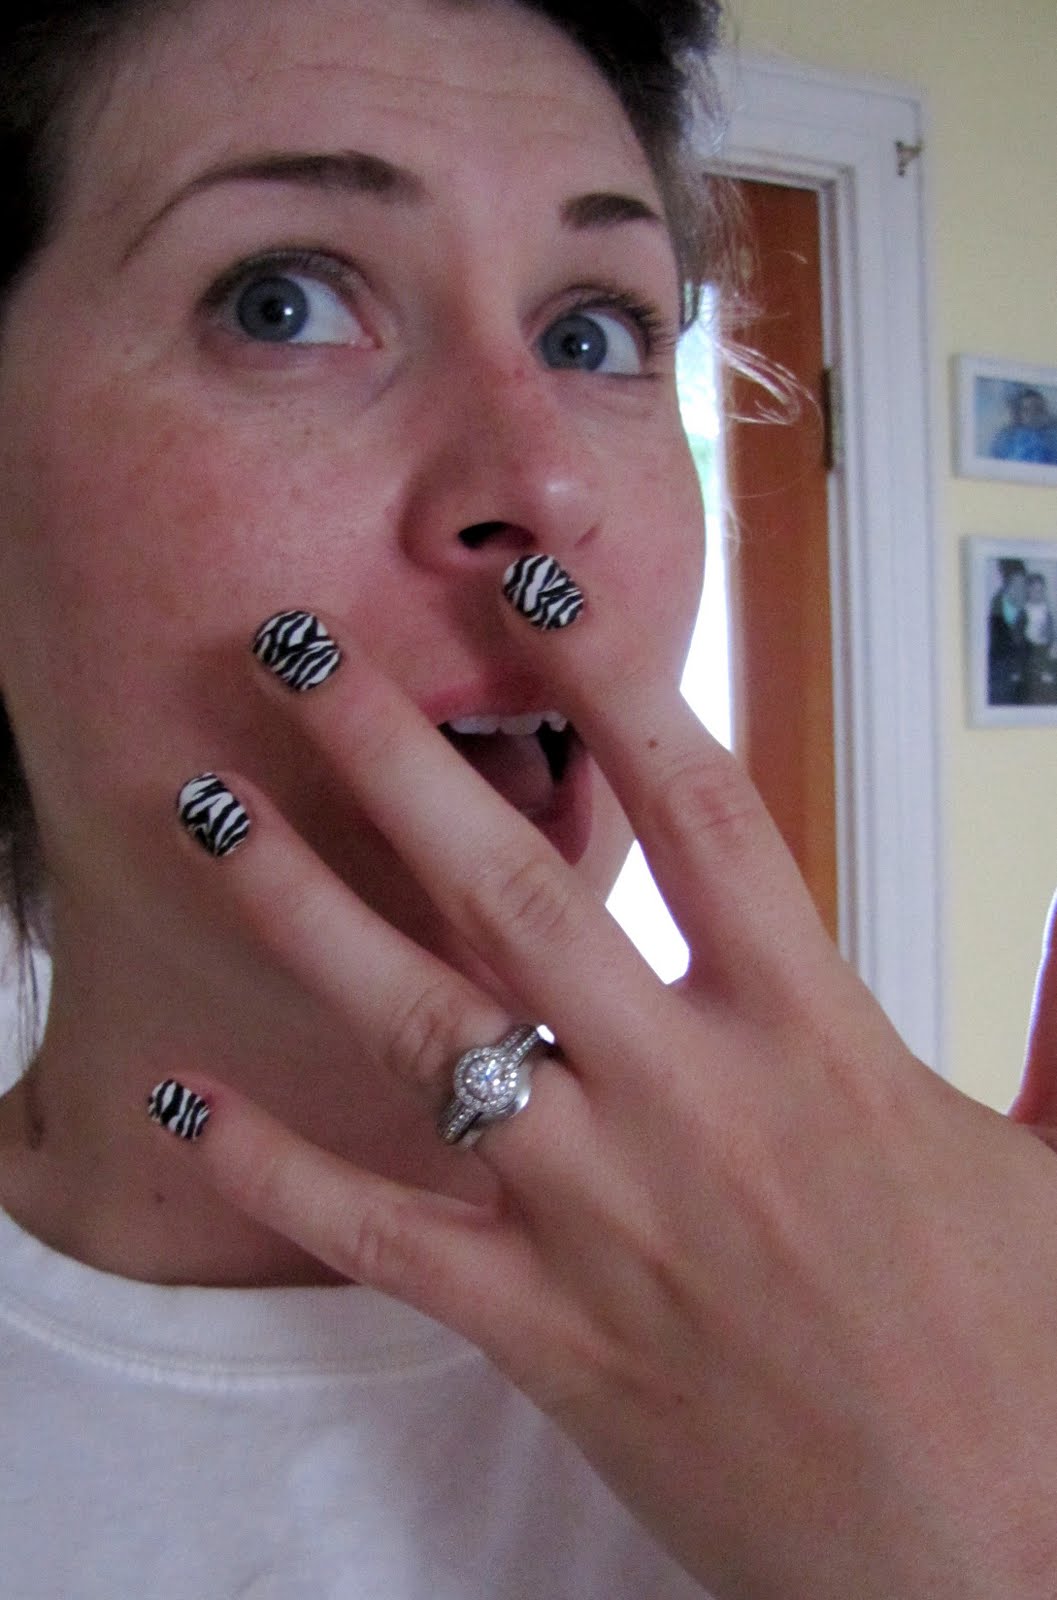 Effects nail polish strips. I went with the zebra print yesterday--love!